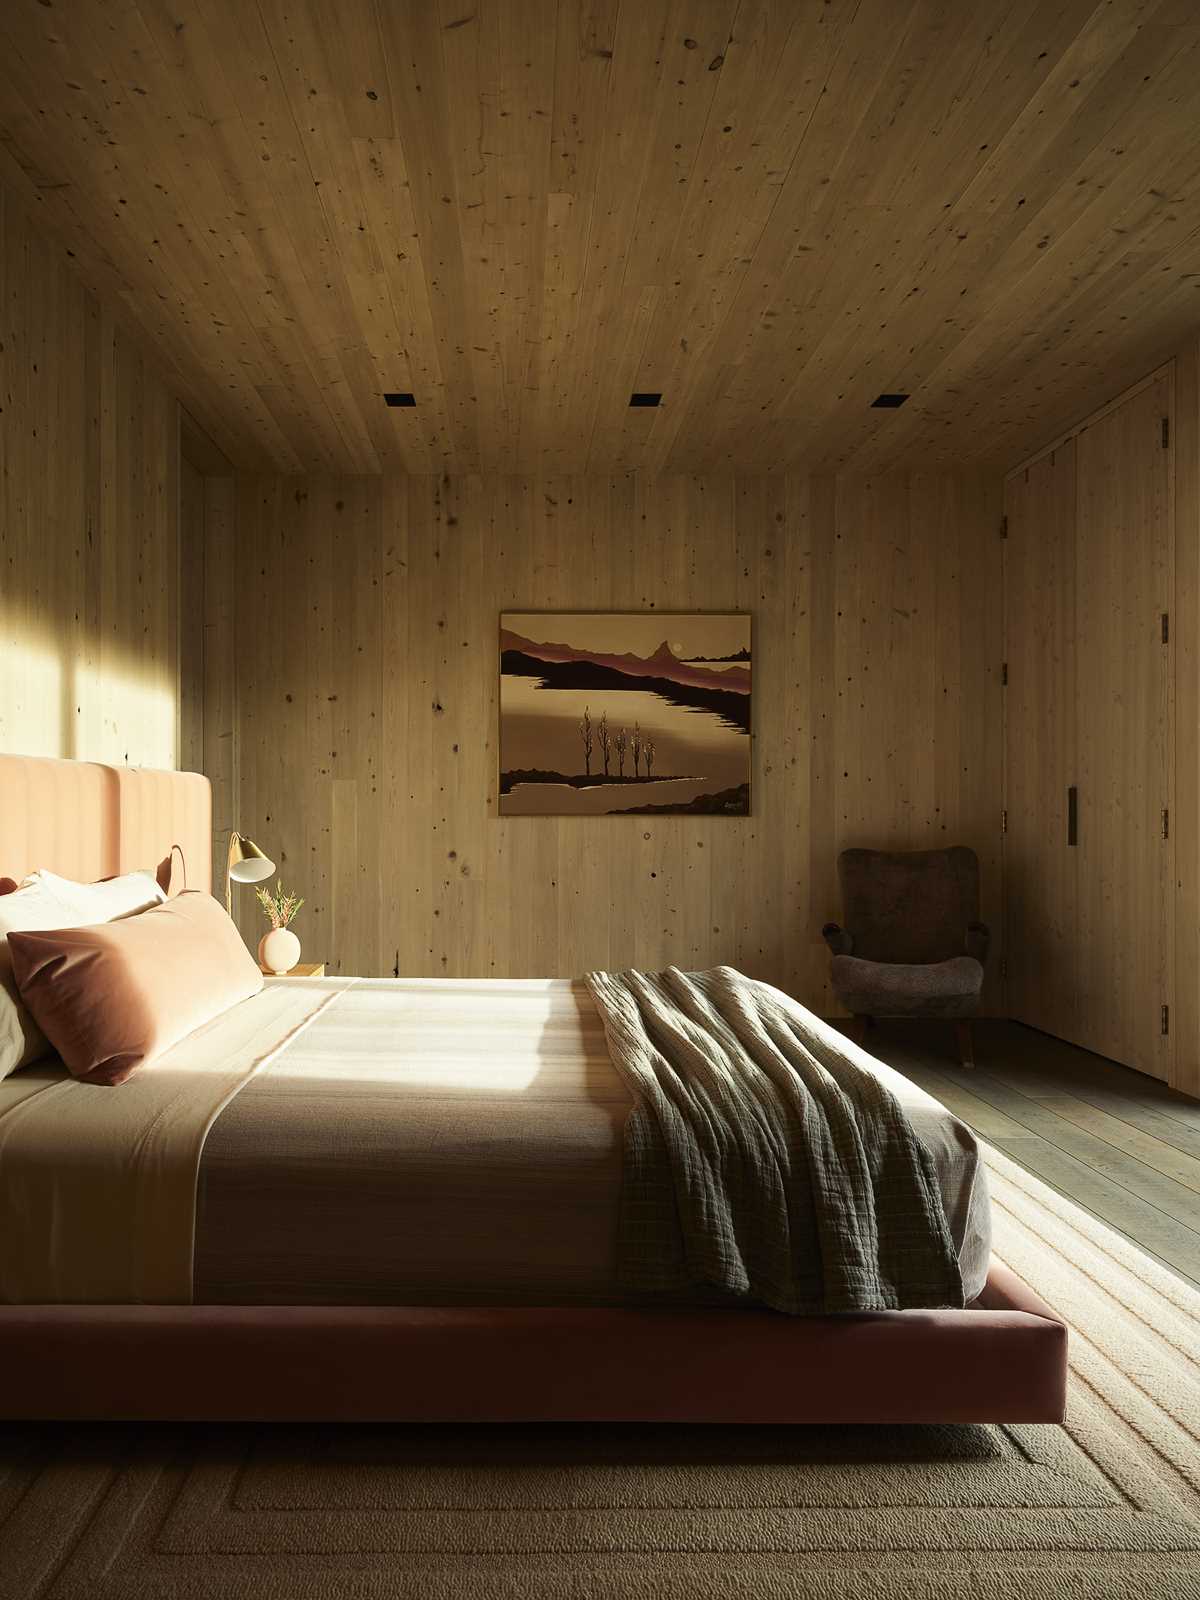 A modern bedroom lined with wood.